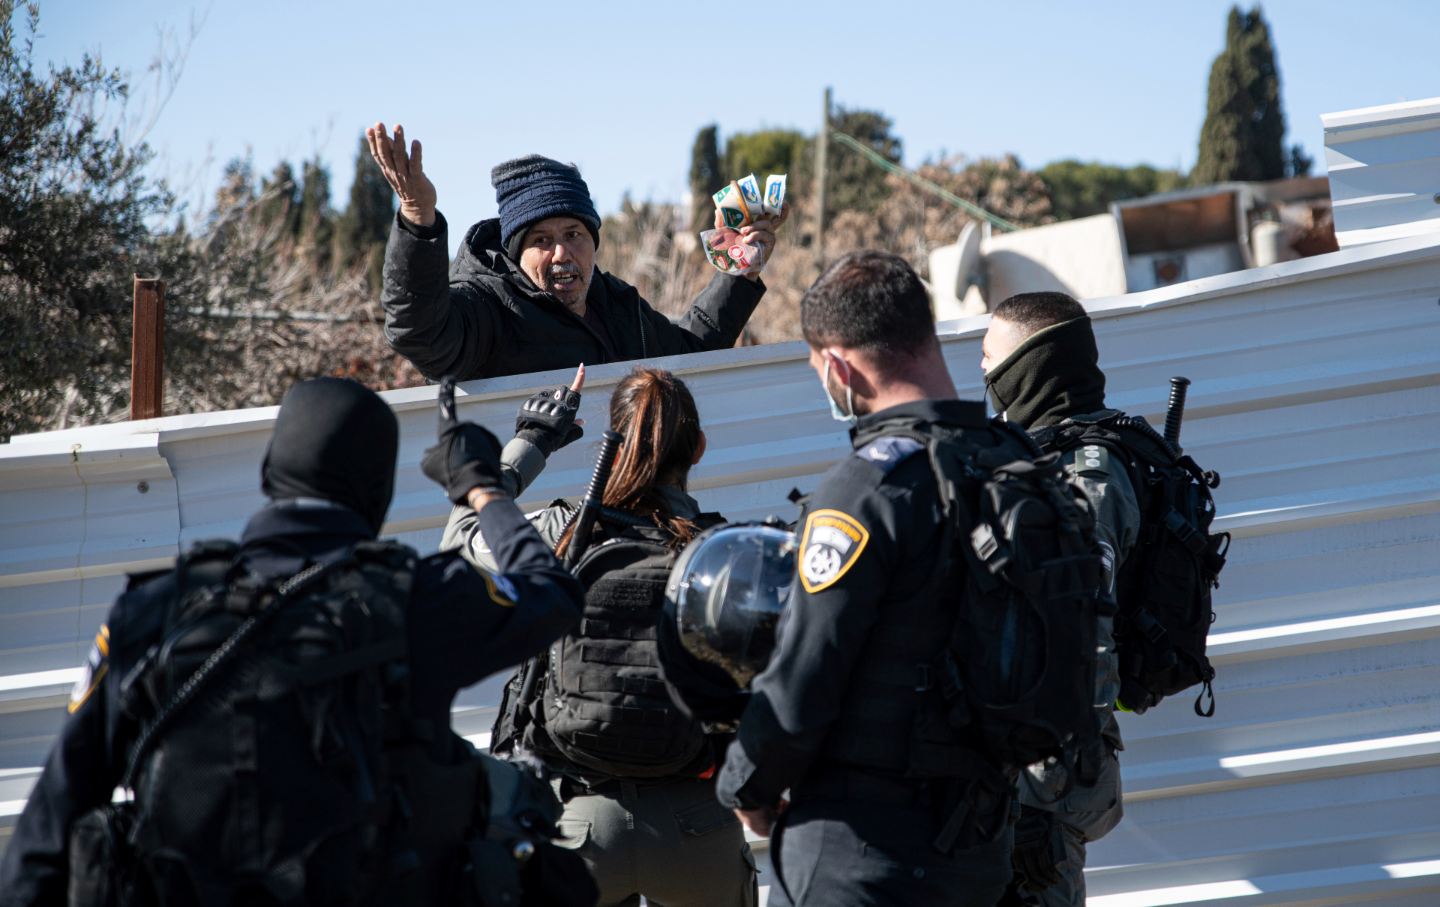 Four Israeli police officers surround a Palestinian man behind a fence.